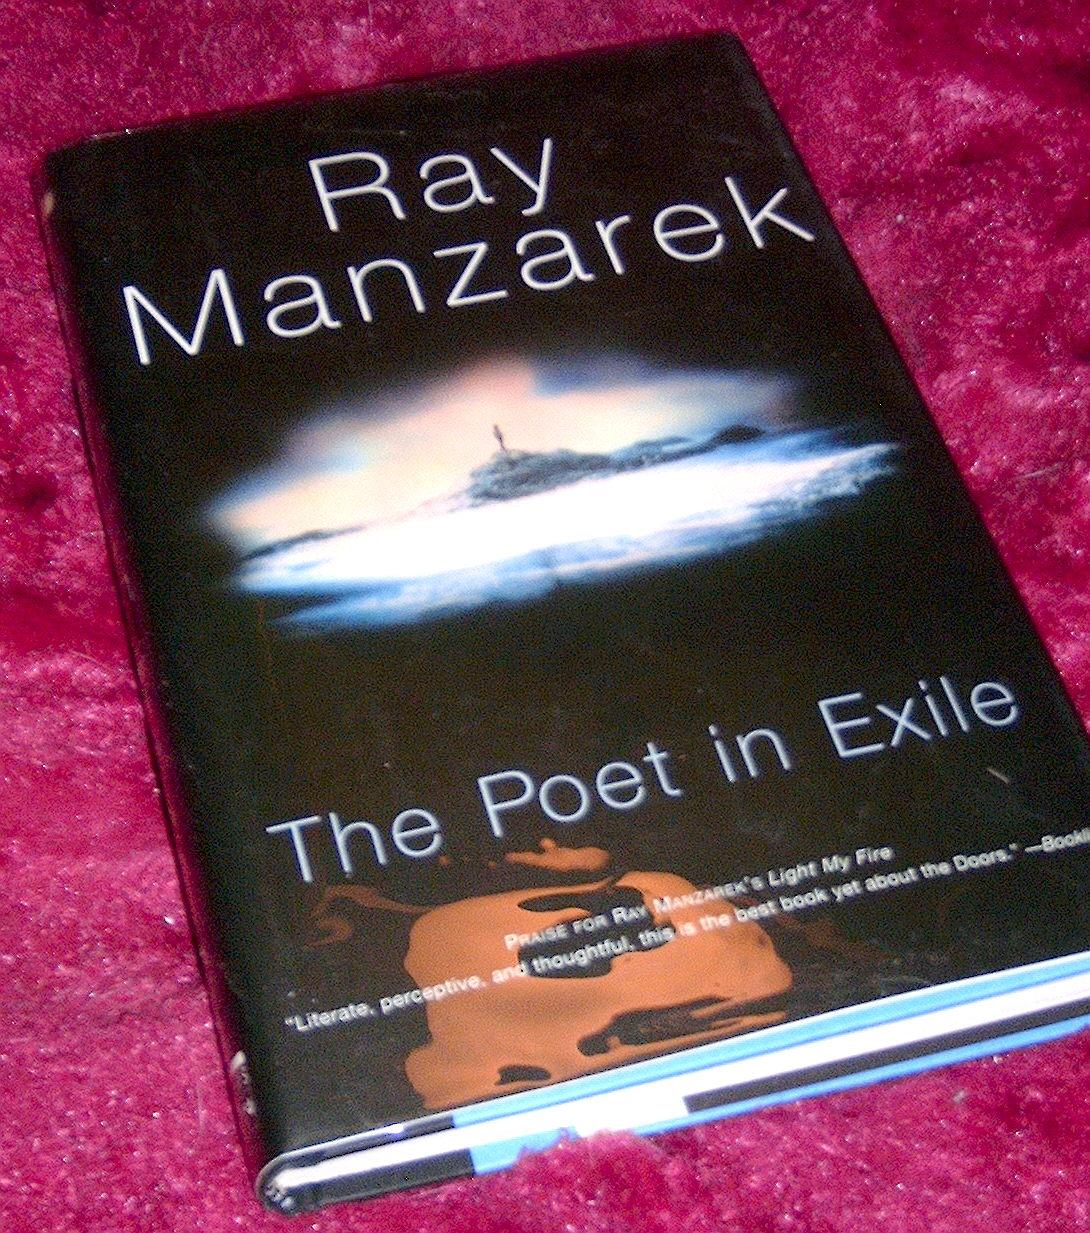 The Poet in Exile : A Journey into the Mystic - Manzarek, Ray